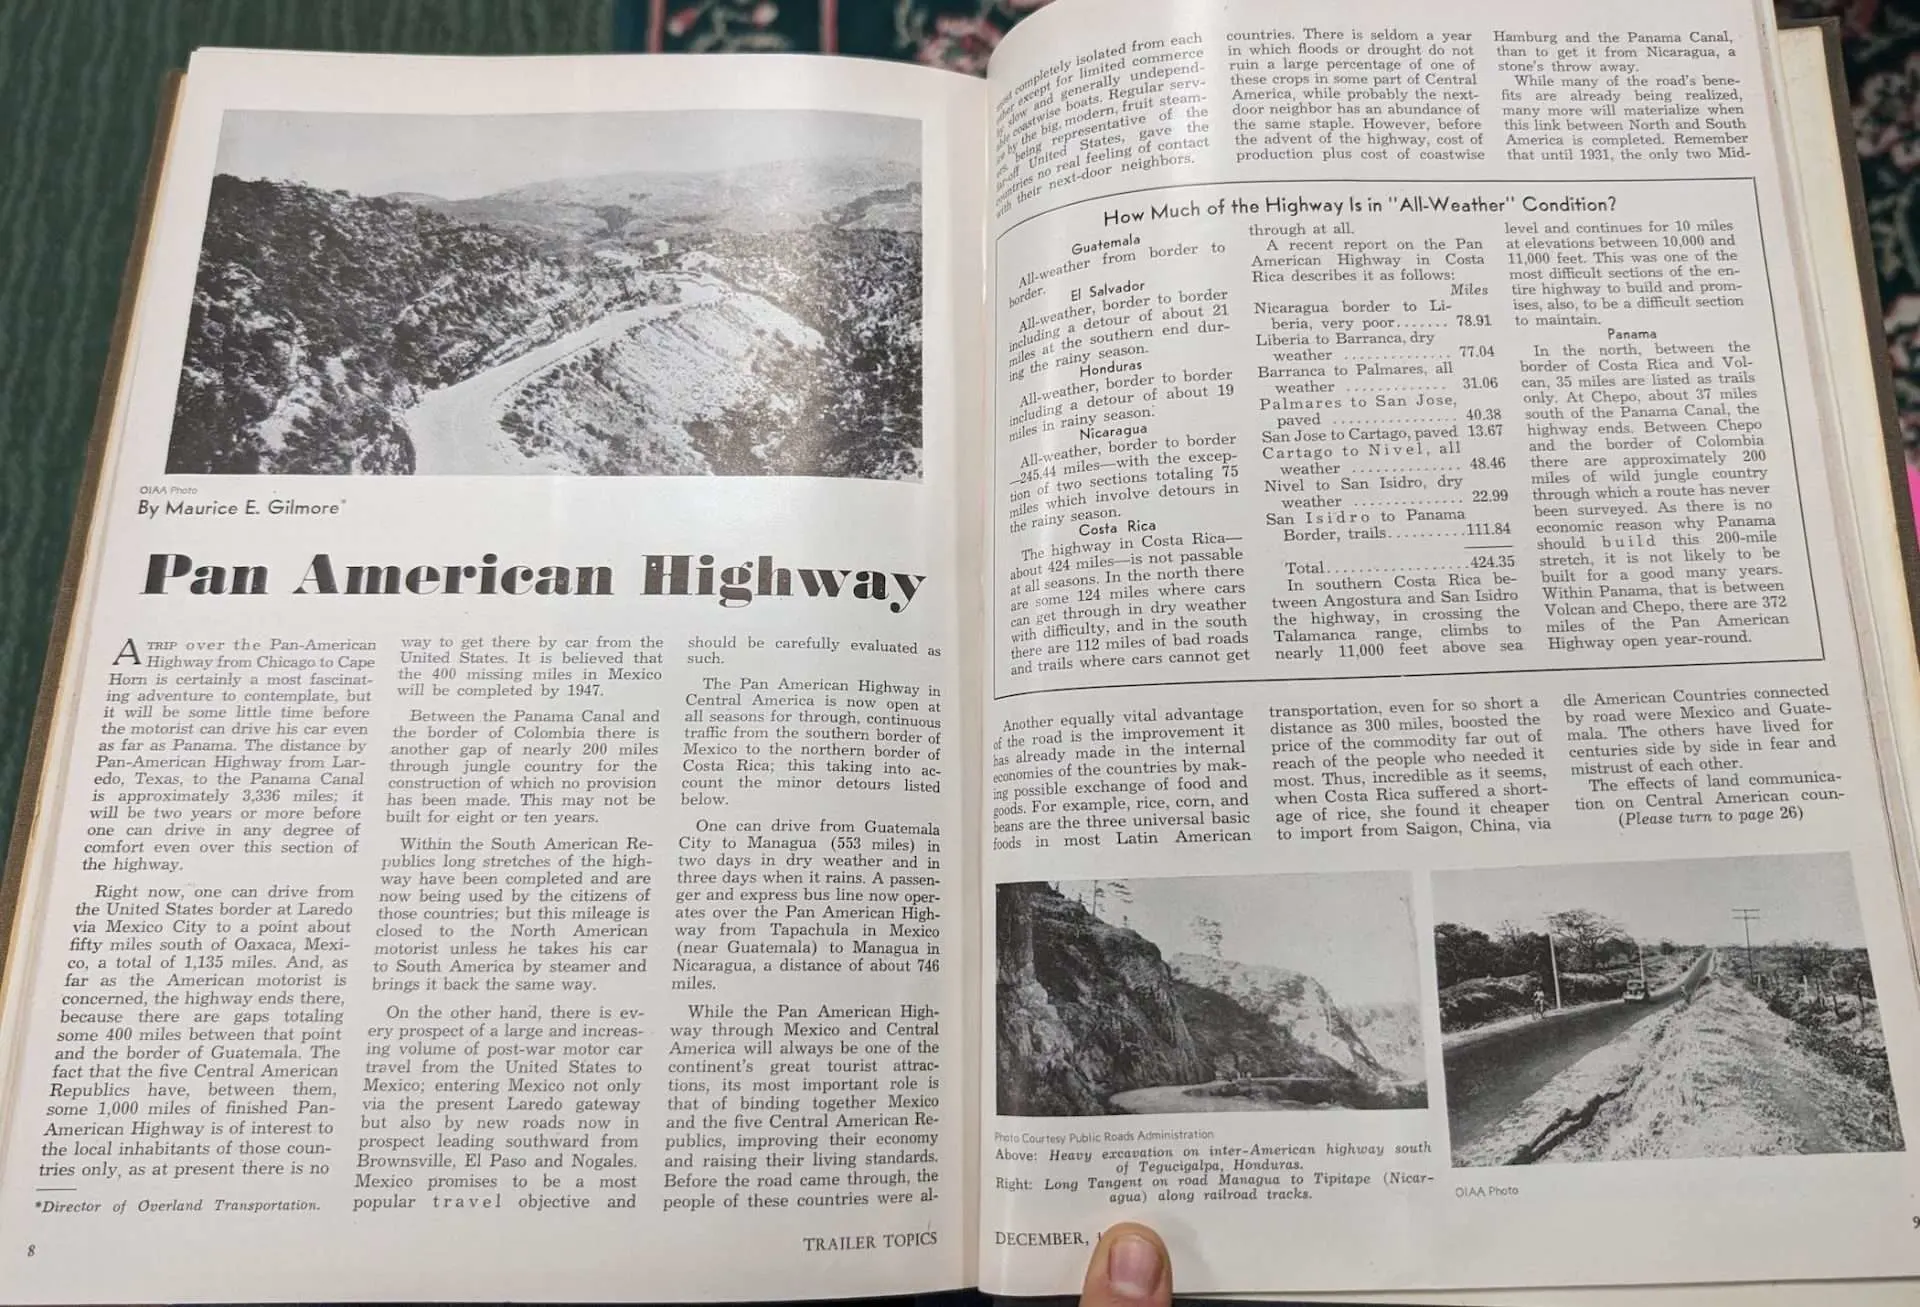 December 1945 Issue of Trailer Topics Magazine, "Pan American Highway" by Maurice E. Gilmore